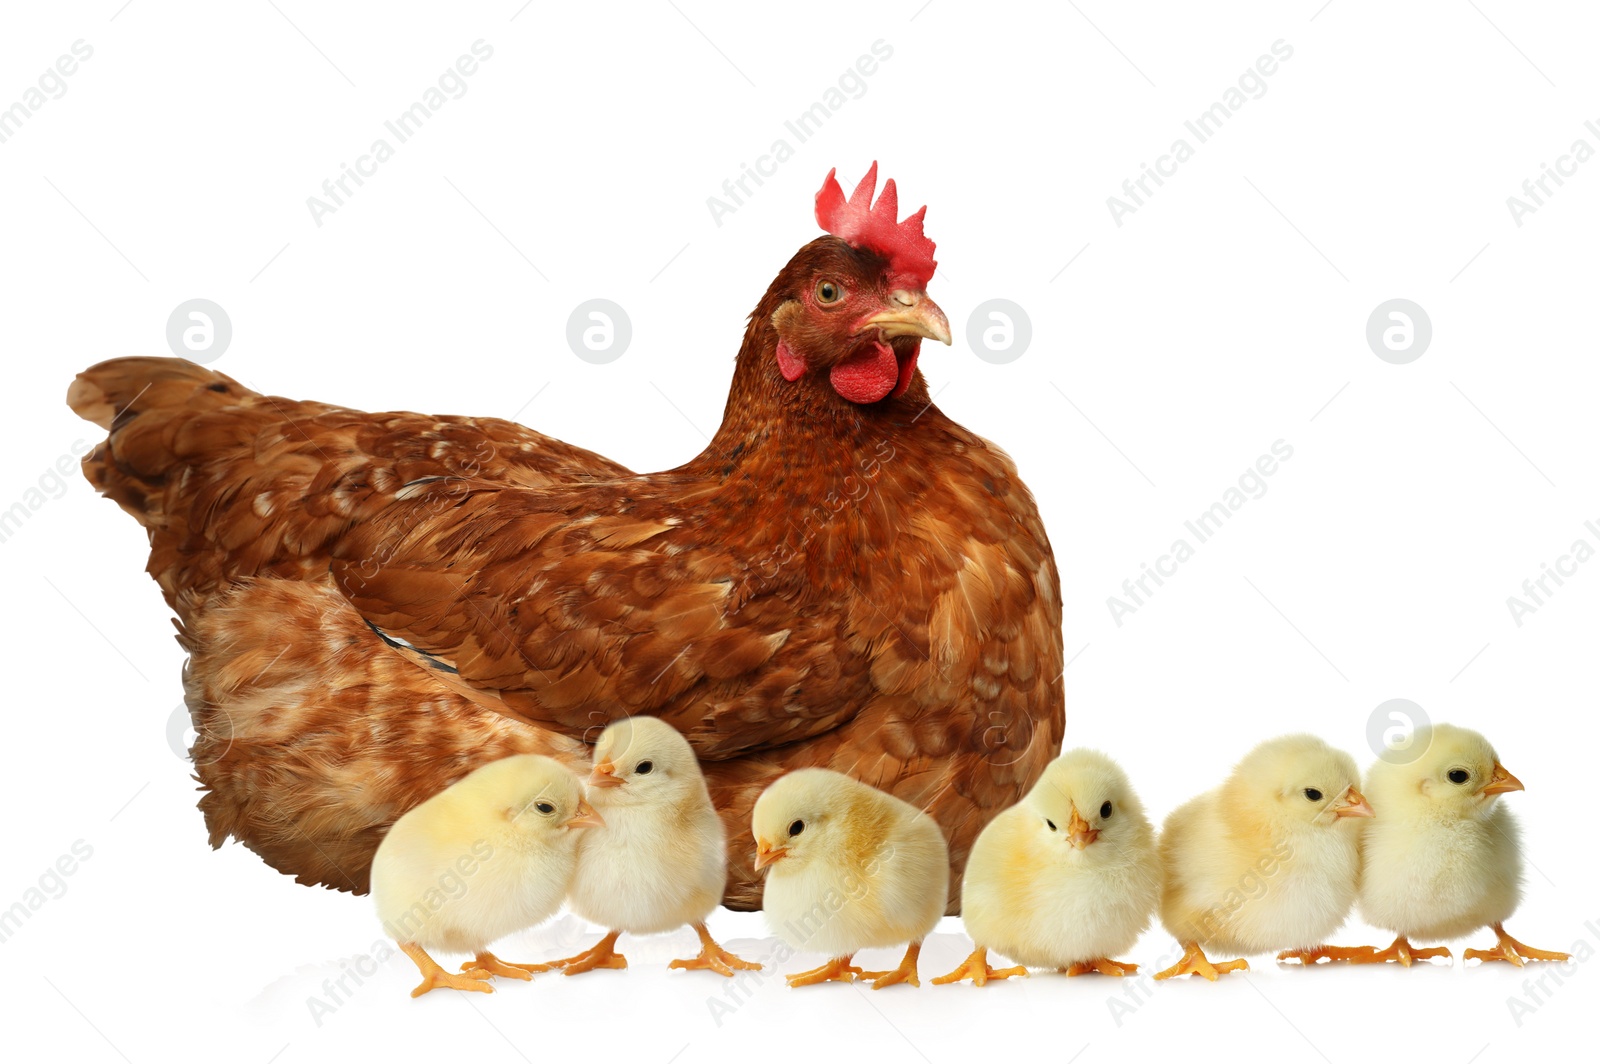 Image of Hen with cute chickens on white background